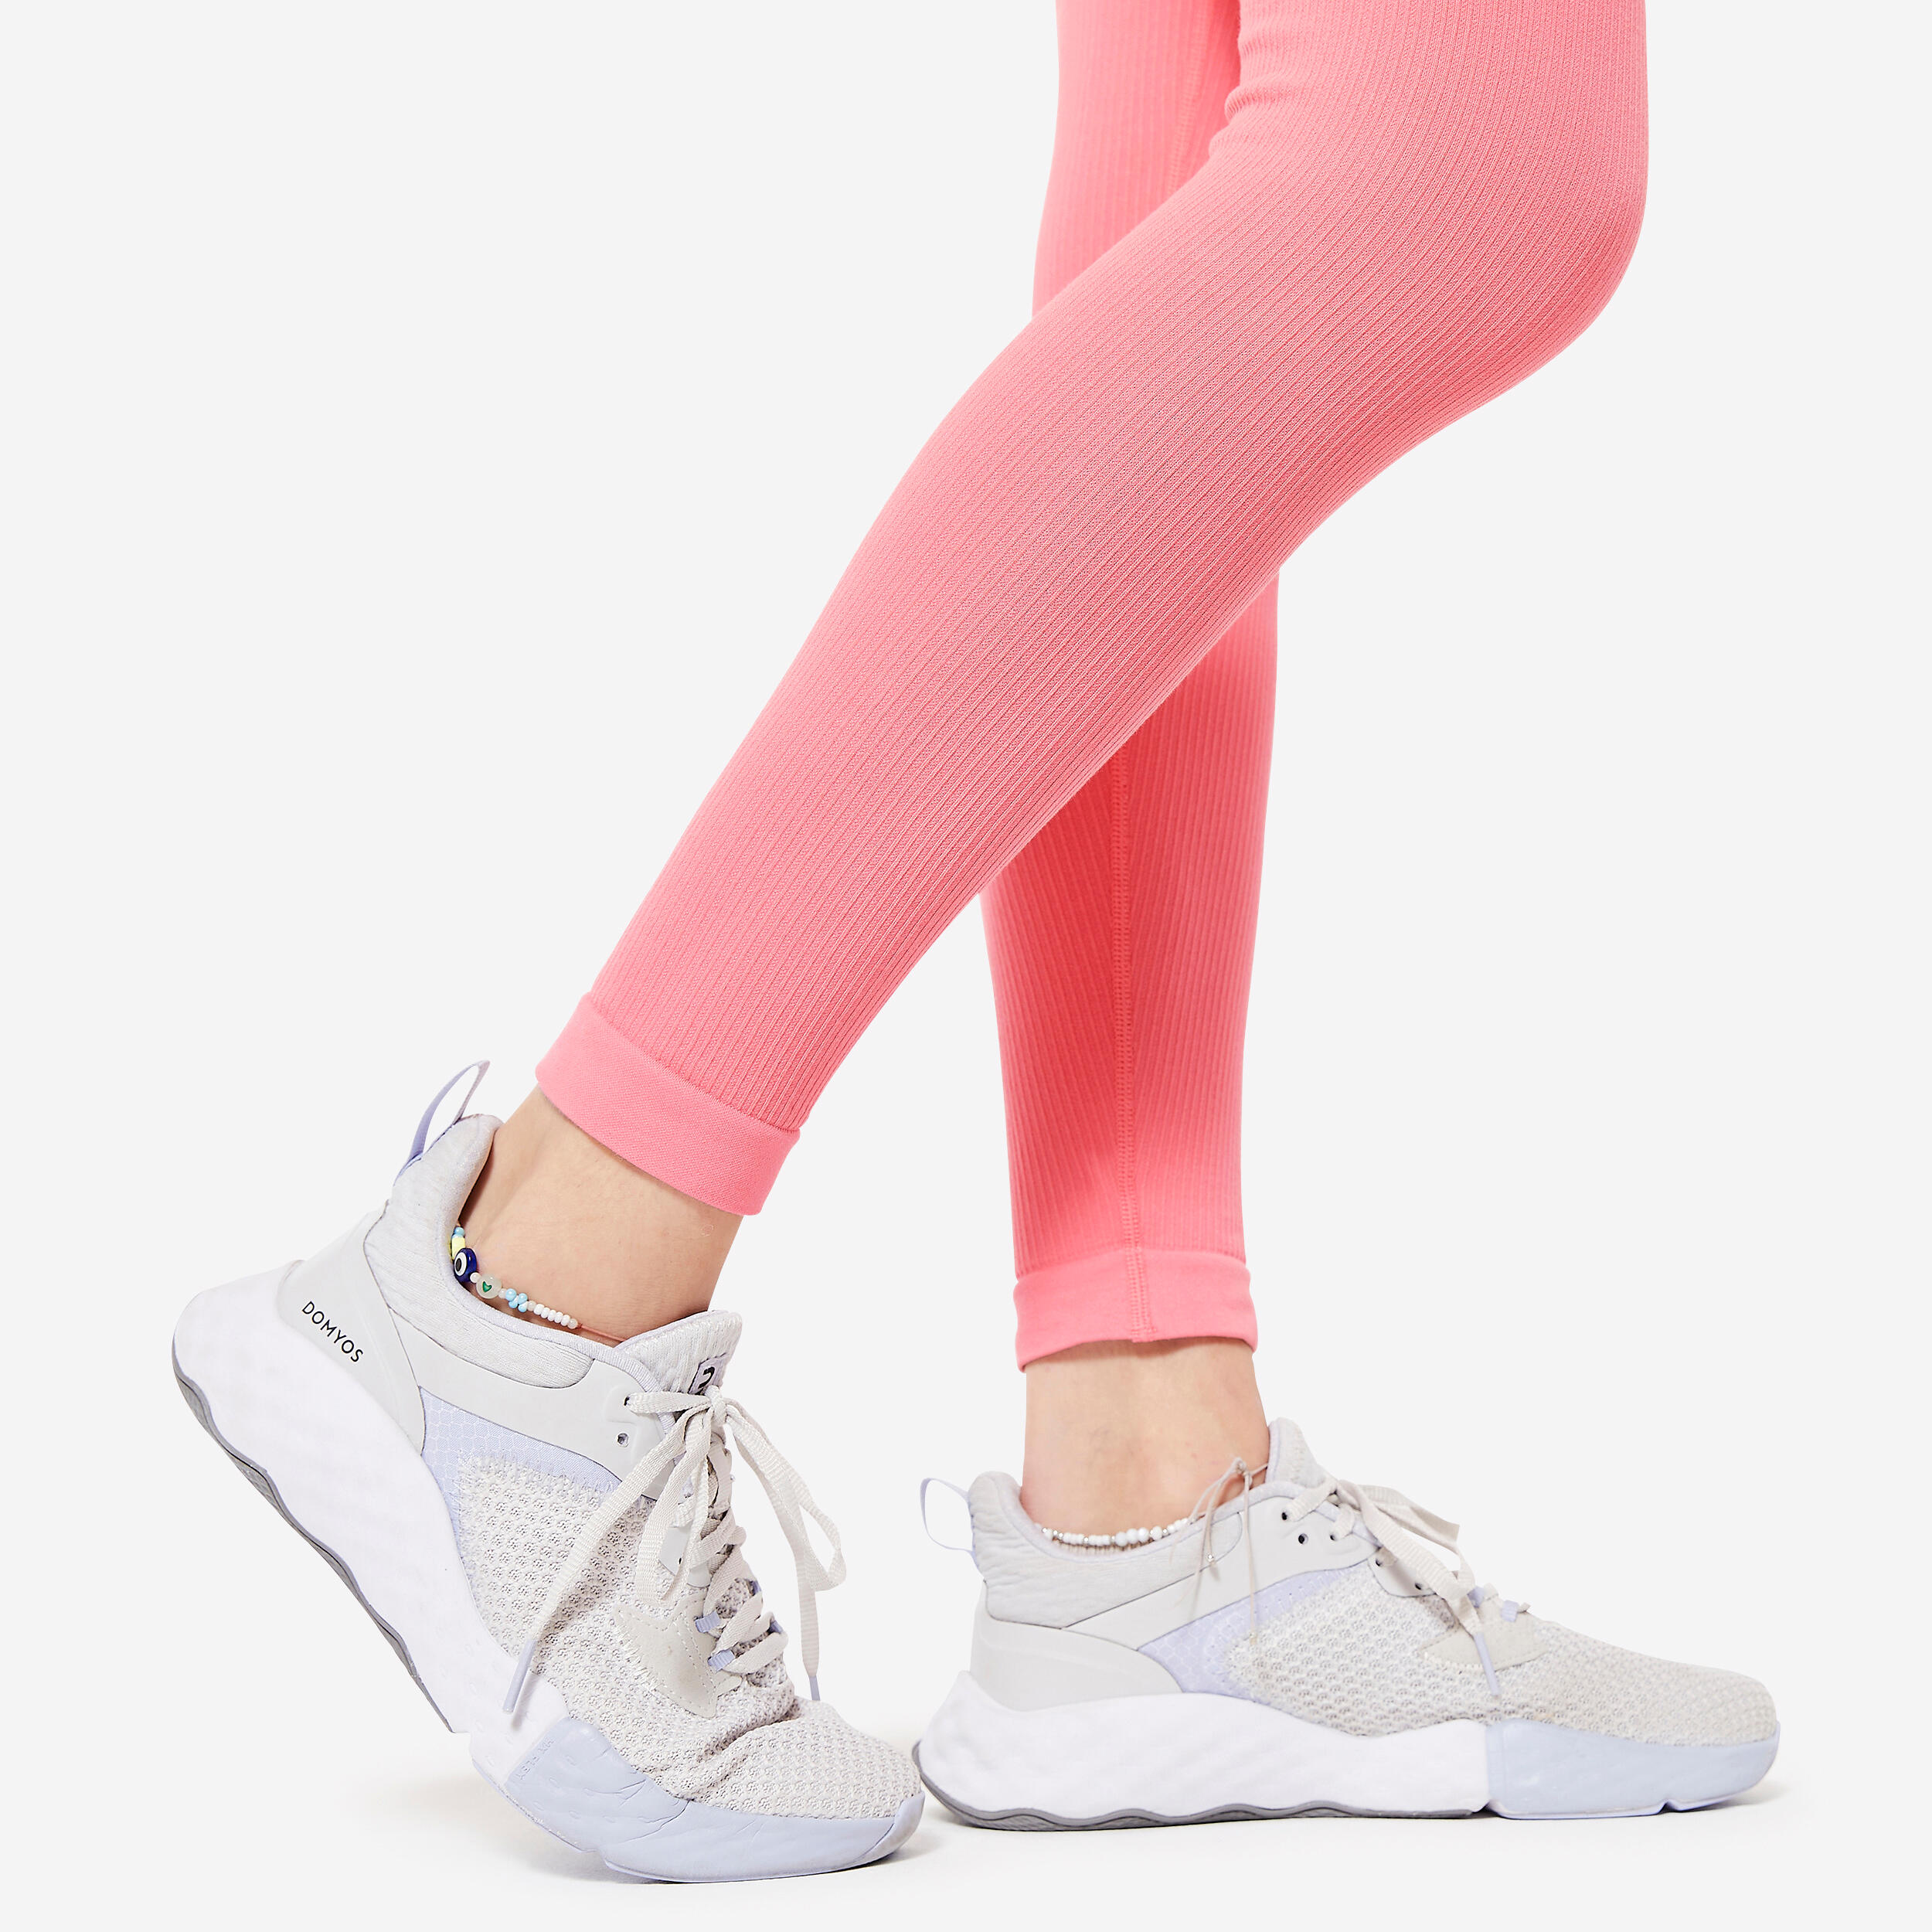 Women's Ribbed Fitness Leggings 520 - Pink Litchi 6/7